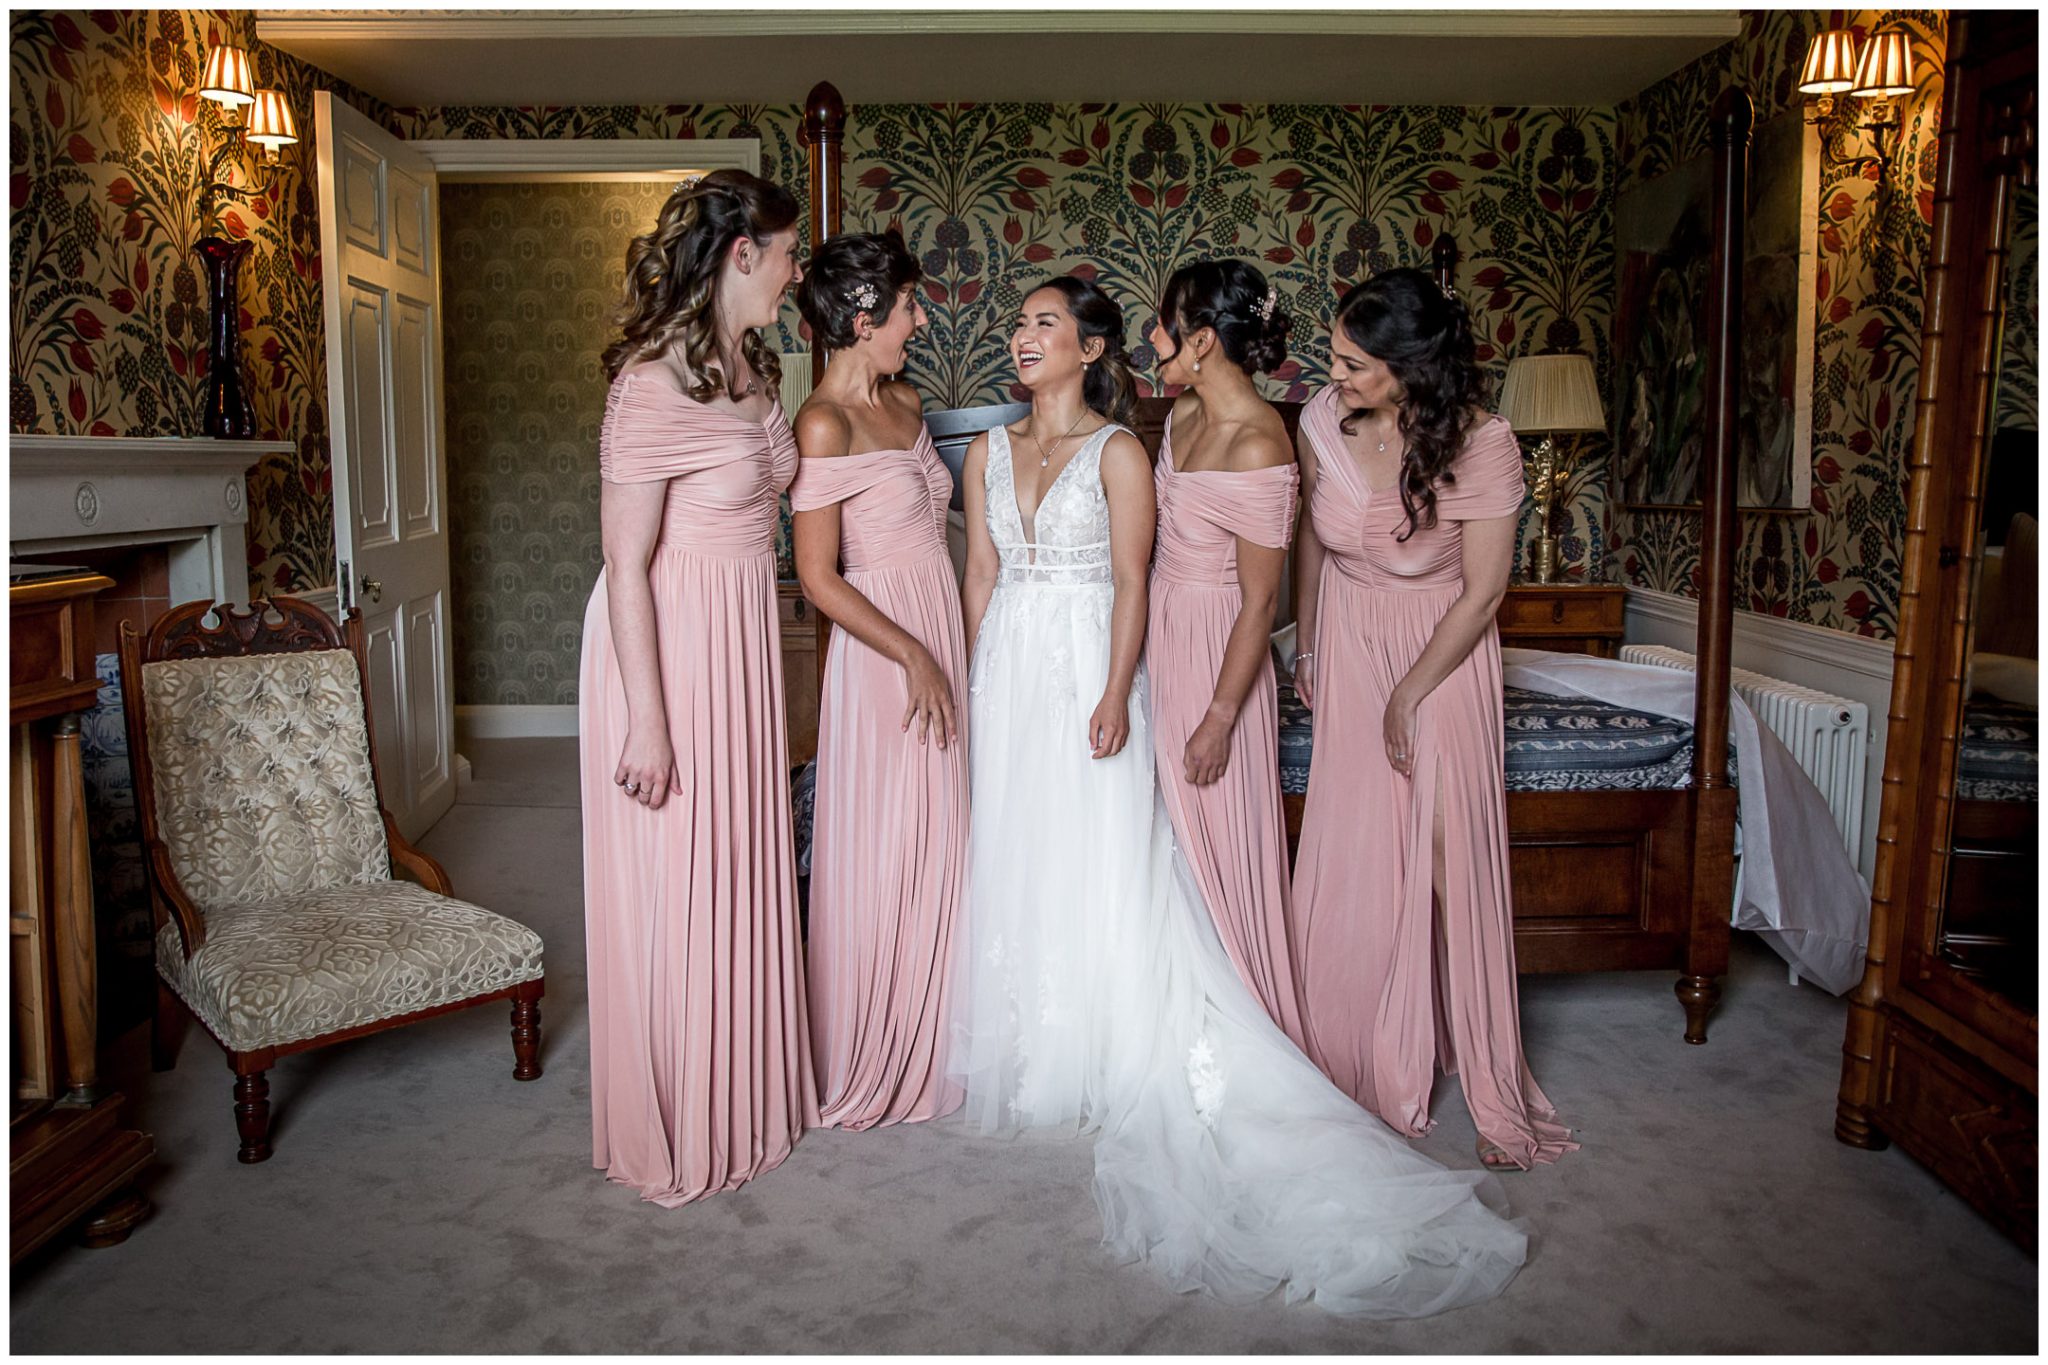 Bride and bridesmaids in dresses